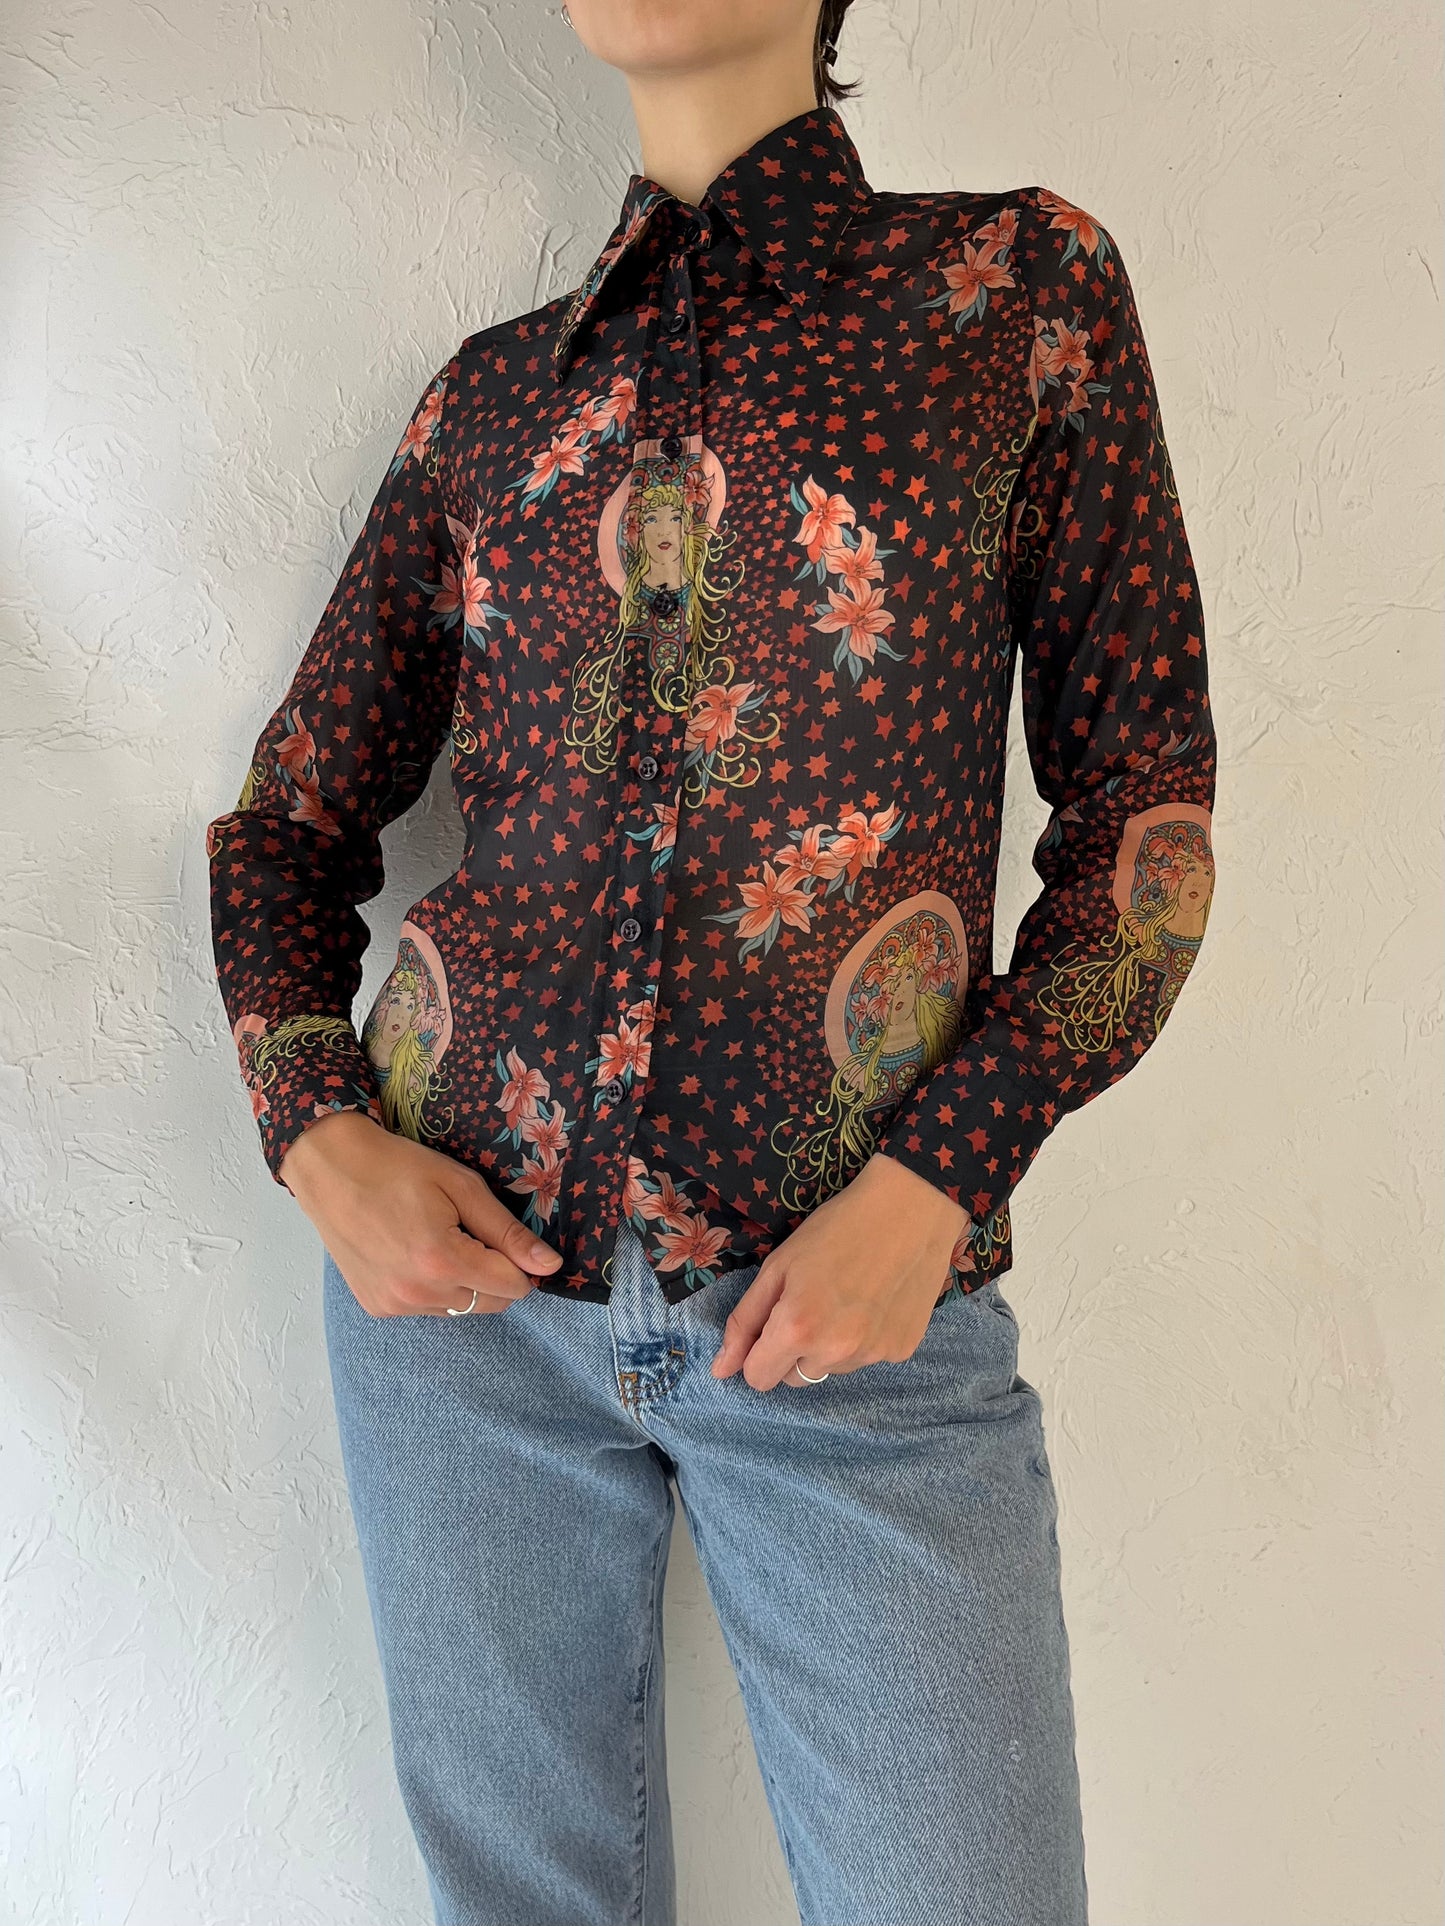 70s 'Chocolat Shop' Sheer Star Blouse / Made in Canada / Small